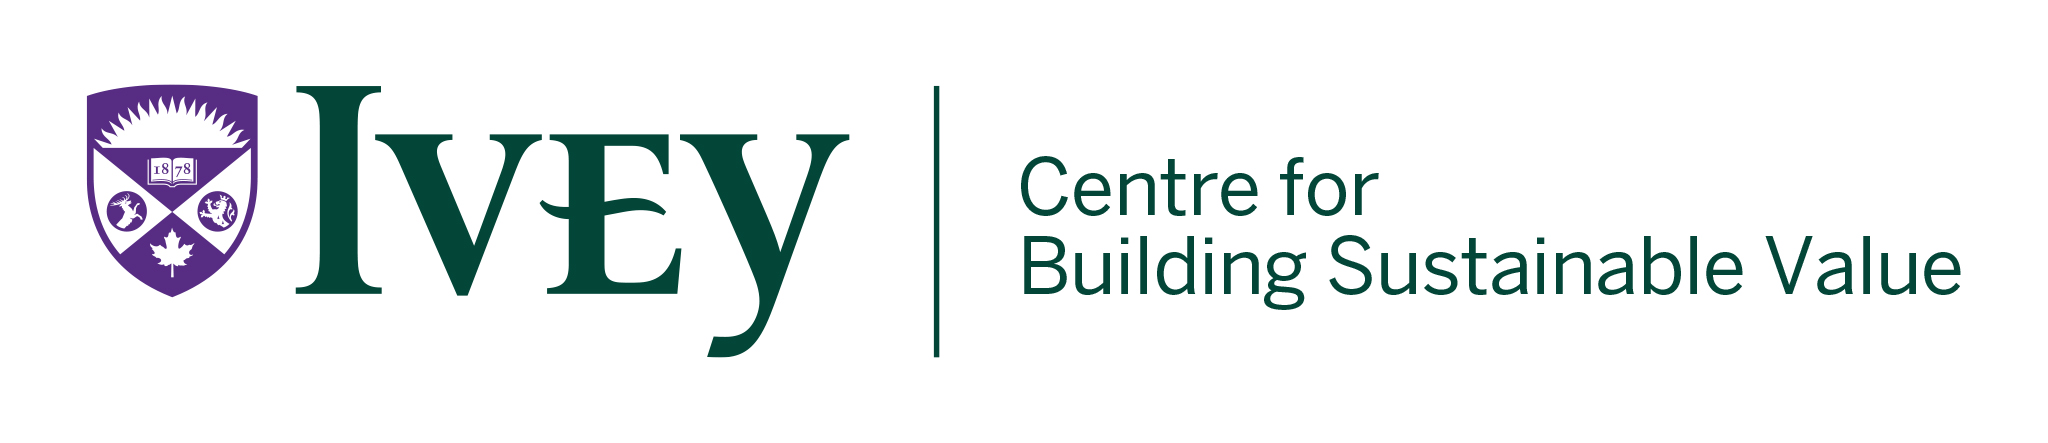 Ivey Centre for Building Sustainable Value